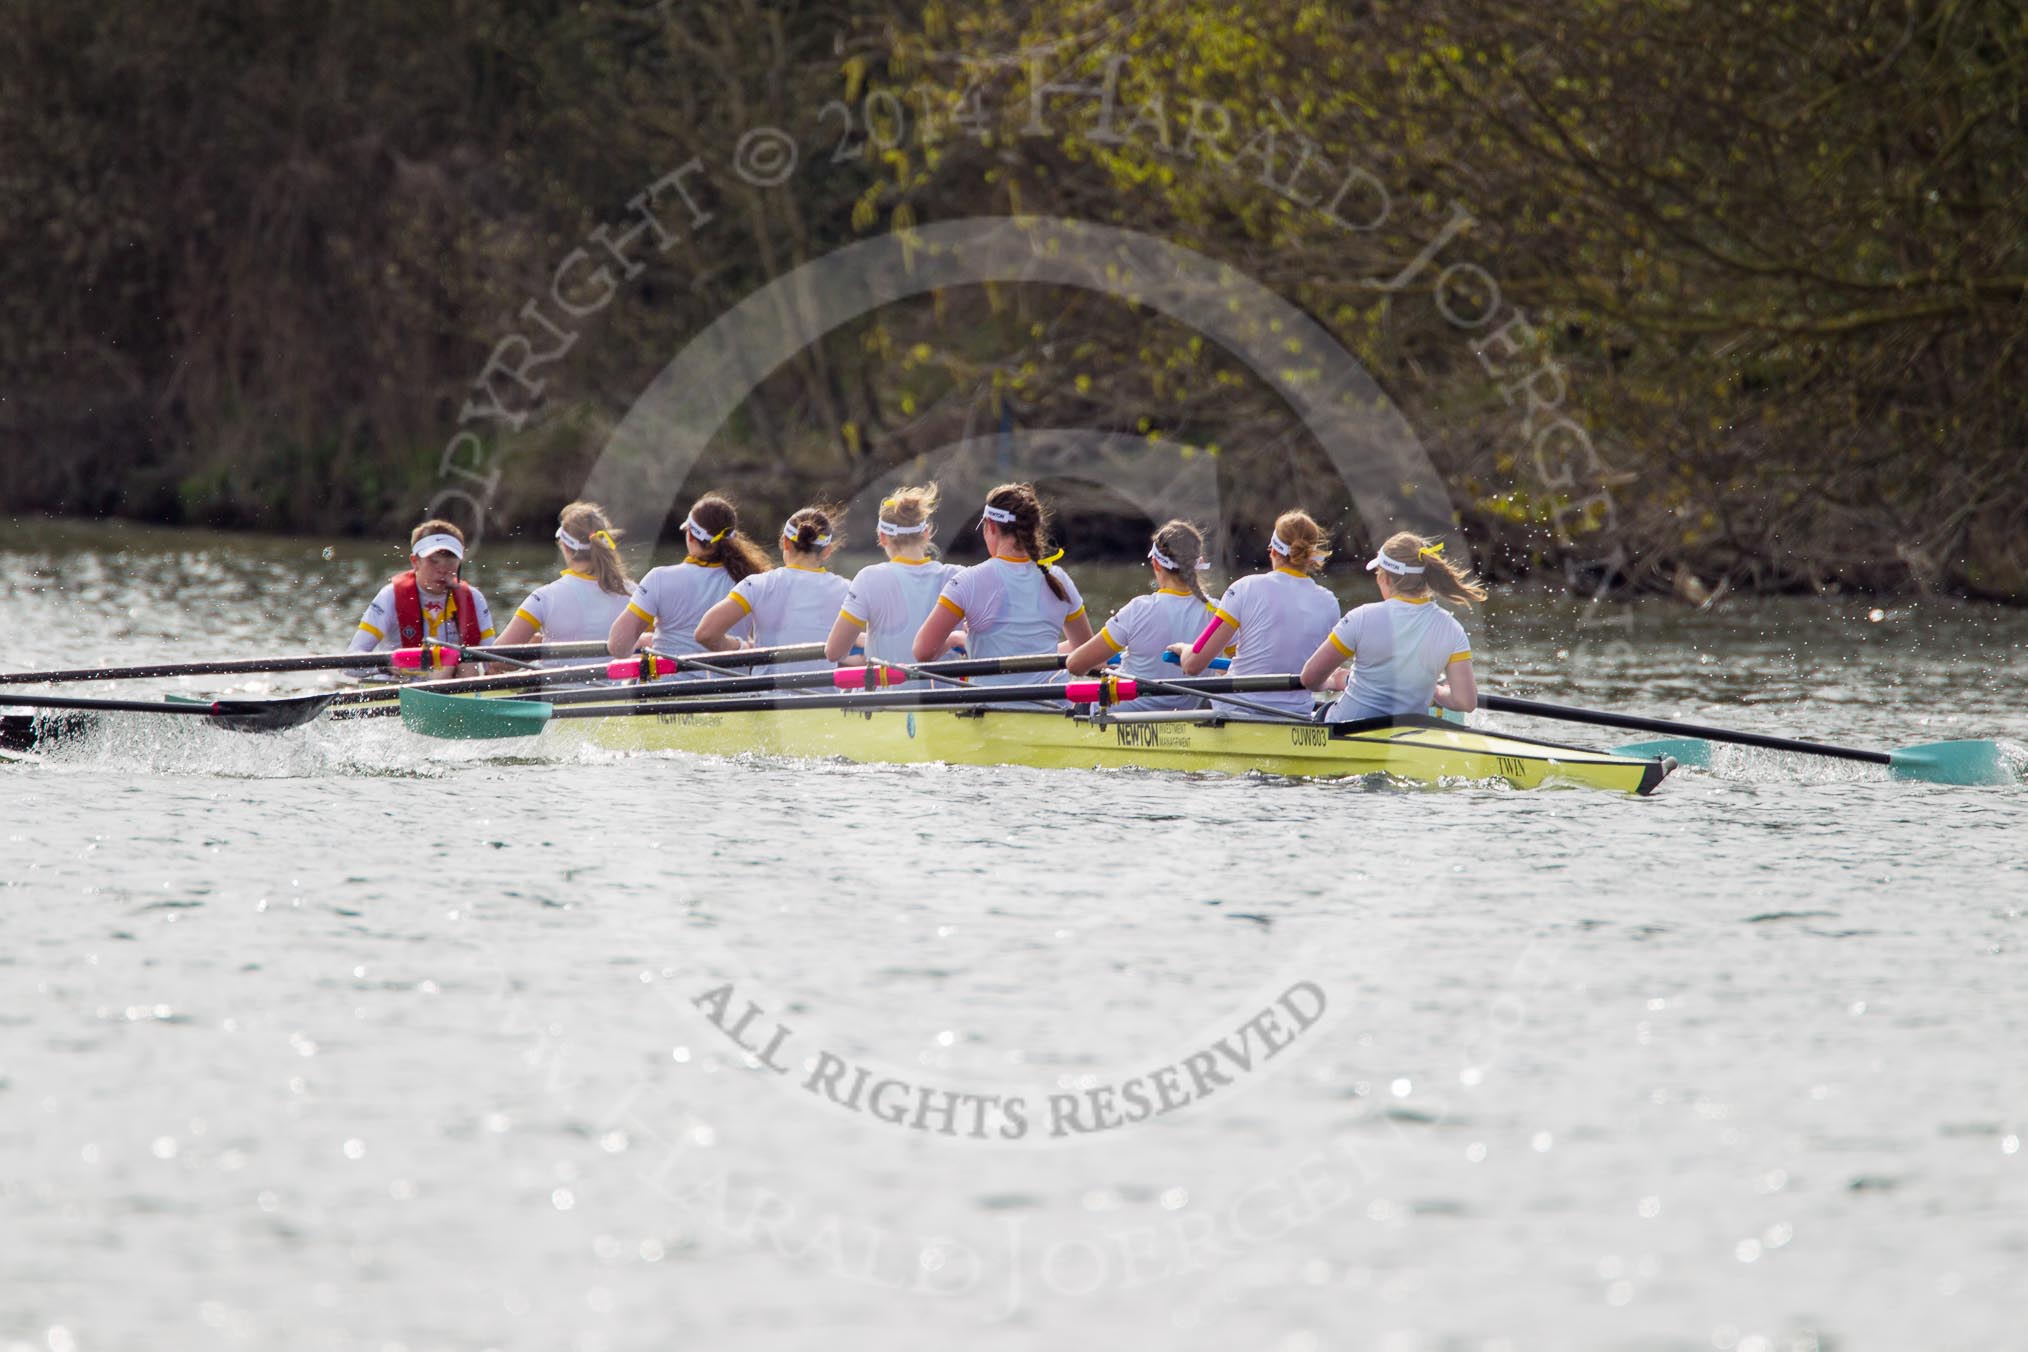 The Women's Boat Race and Henley Boat Races 2014: The Women's Reserves - Osiris v. Blondie race. Blondie (Cambridge) with cox Will McDermott, stroke Hannah Evans, 7 Nicole Stephens, 6 Sarah Crowther, 5 Hannah Roberts, 4 Gabriella Johannson, 3 Anouska Bartlett, 2 Sara Lackner, bow Tamsin Samuels..
River Thames,
Henley-on-Thames,
Buckinghamshire,
United Kingdom,
on 30 March 2014 at 14:16, image #149